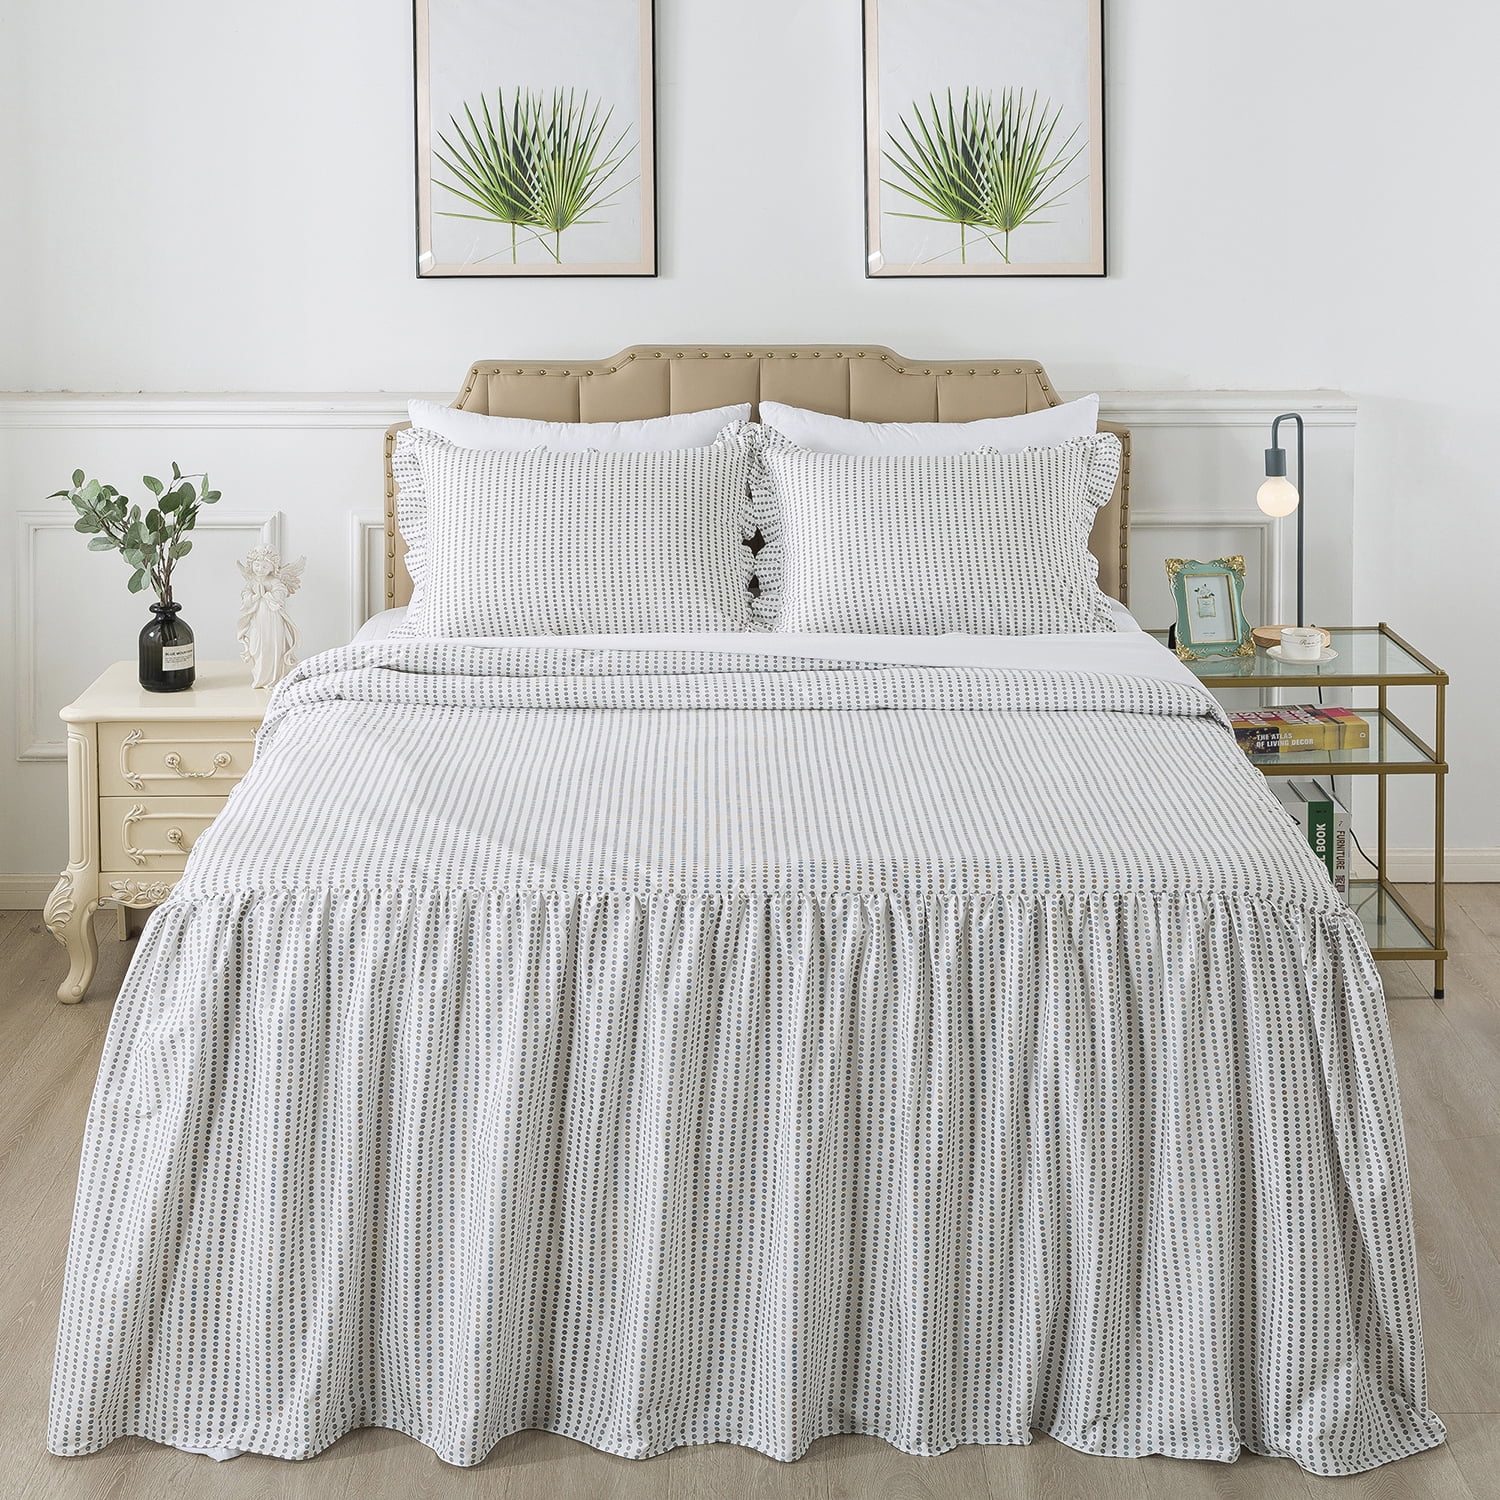 Details about   Chezmoi Collection 7-Piece Shabby Chic Bedding Tassel Fringe Comforter Set White 